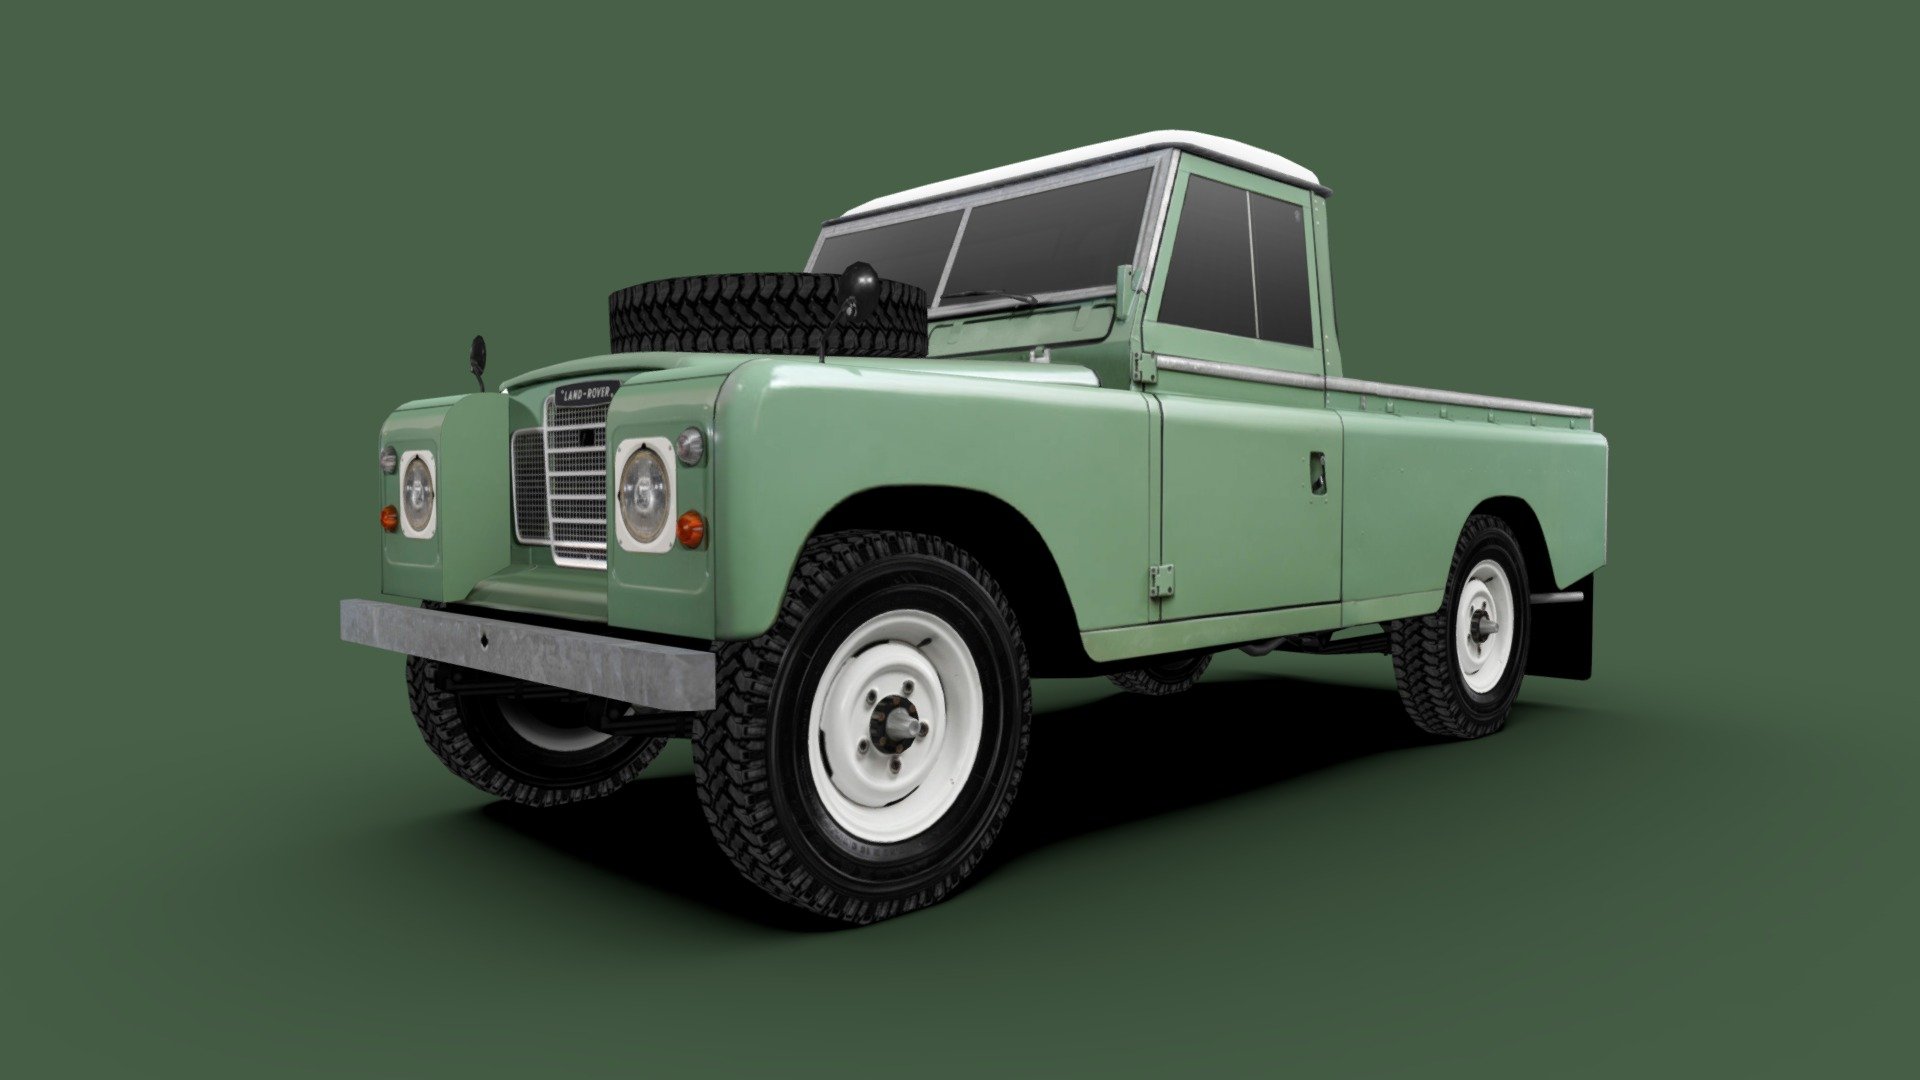 3d model of the 1971 Land Rover series III, a 2-door off-road pickup vehicle.

The model is very low-poly, full-scale, real photos texture (single 2048 x 2048 png).

Package includes 5 file formats and texture (3ds, fbx, dae, obj and skp)

Hope you enjoy it.

José Bronze - Land Rover Series III 1971 - Buy Royalty Free 3D model by Jose Bronze (@pinceladas3d) 3d model